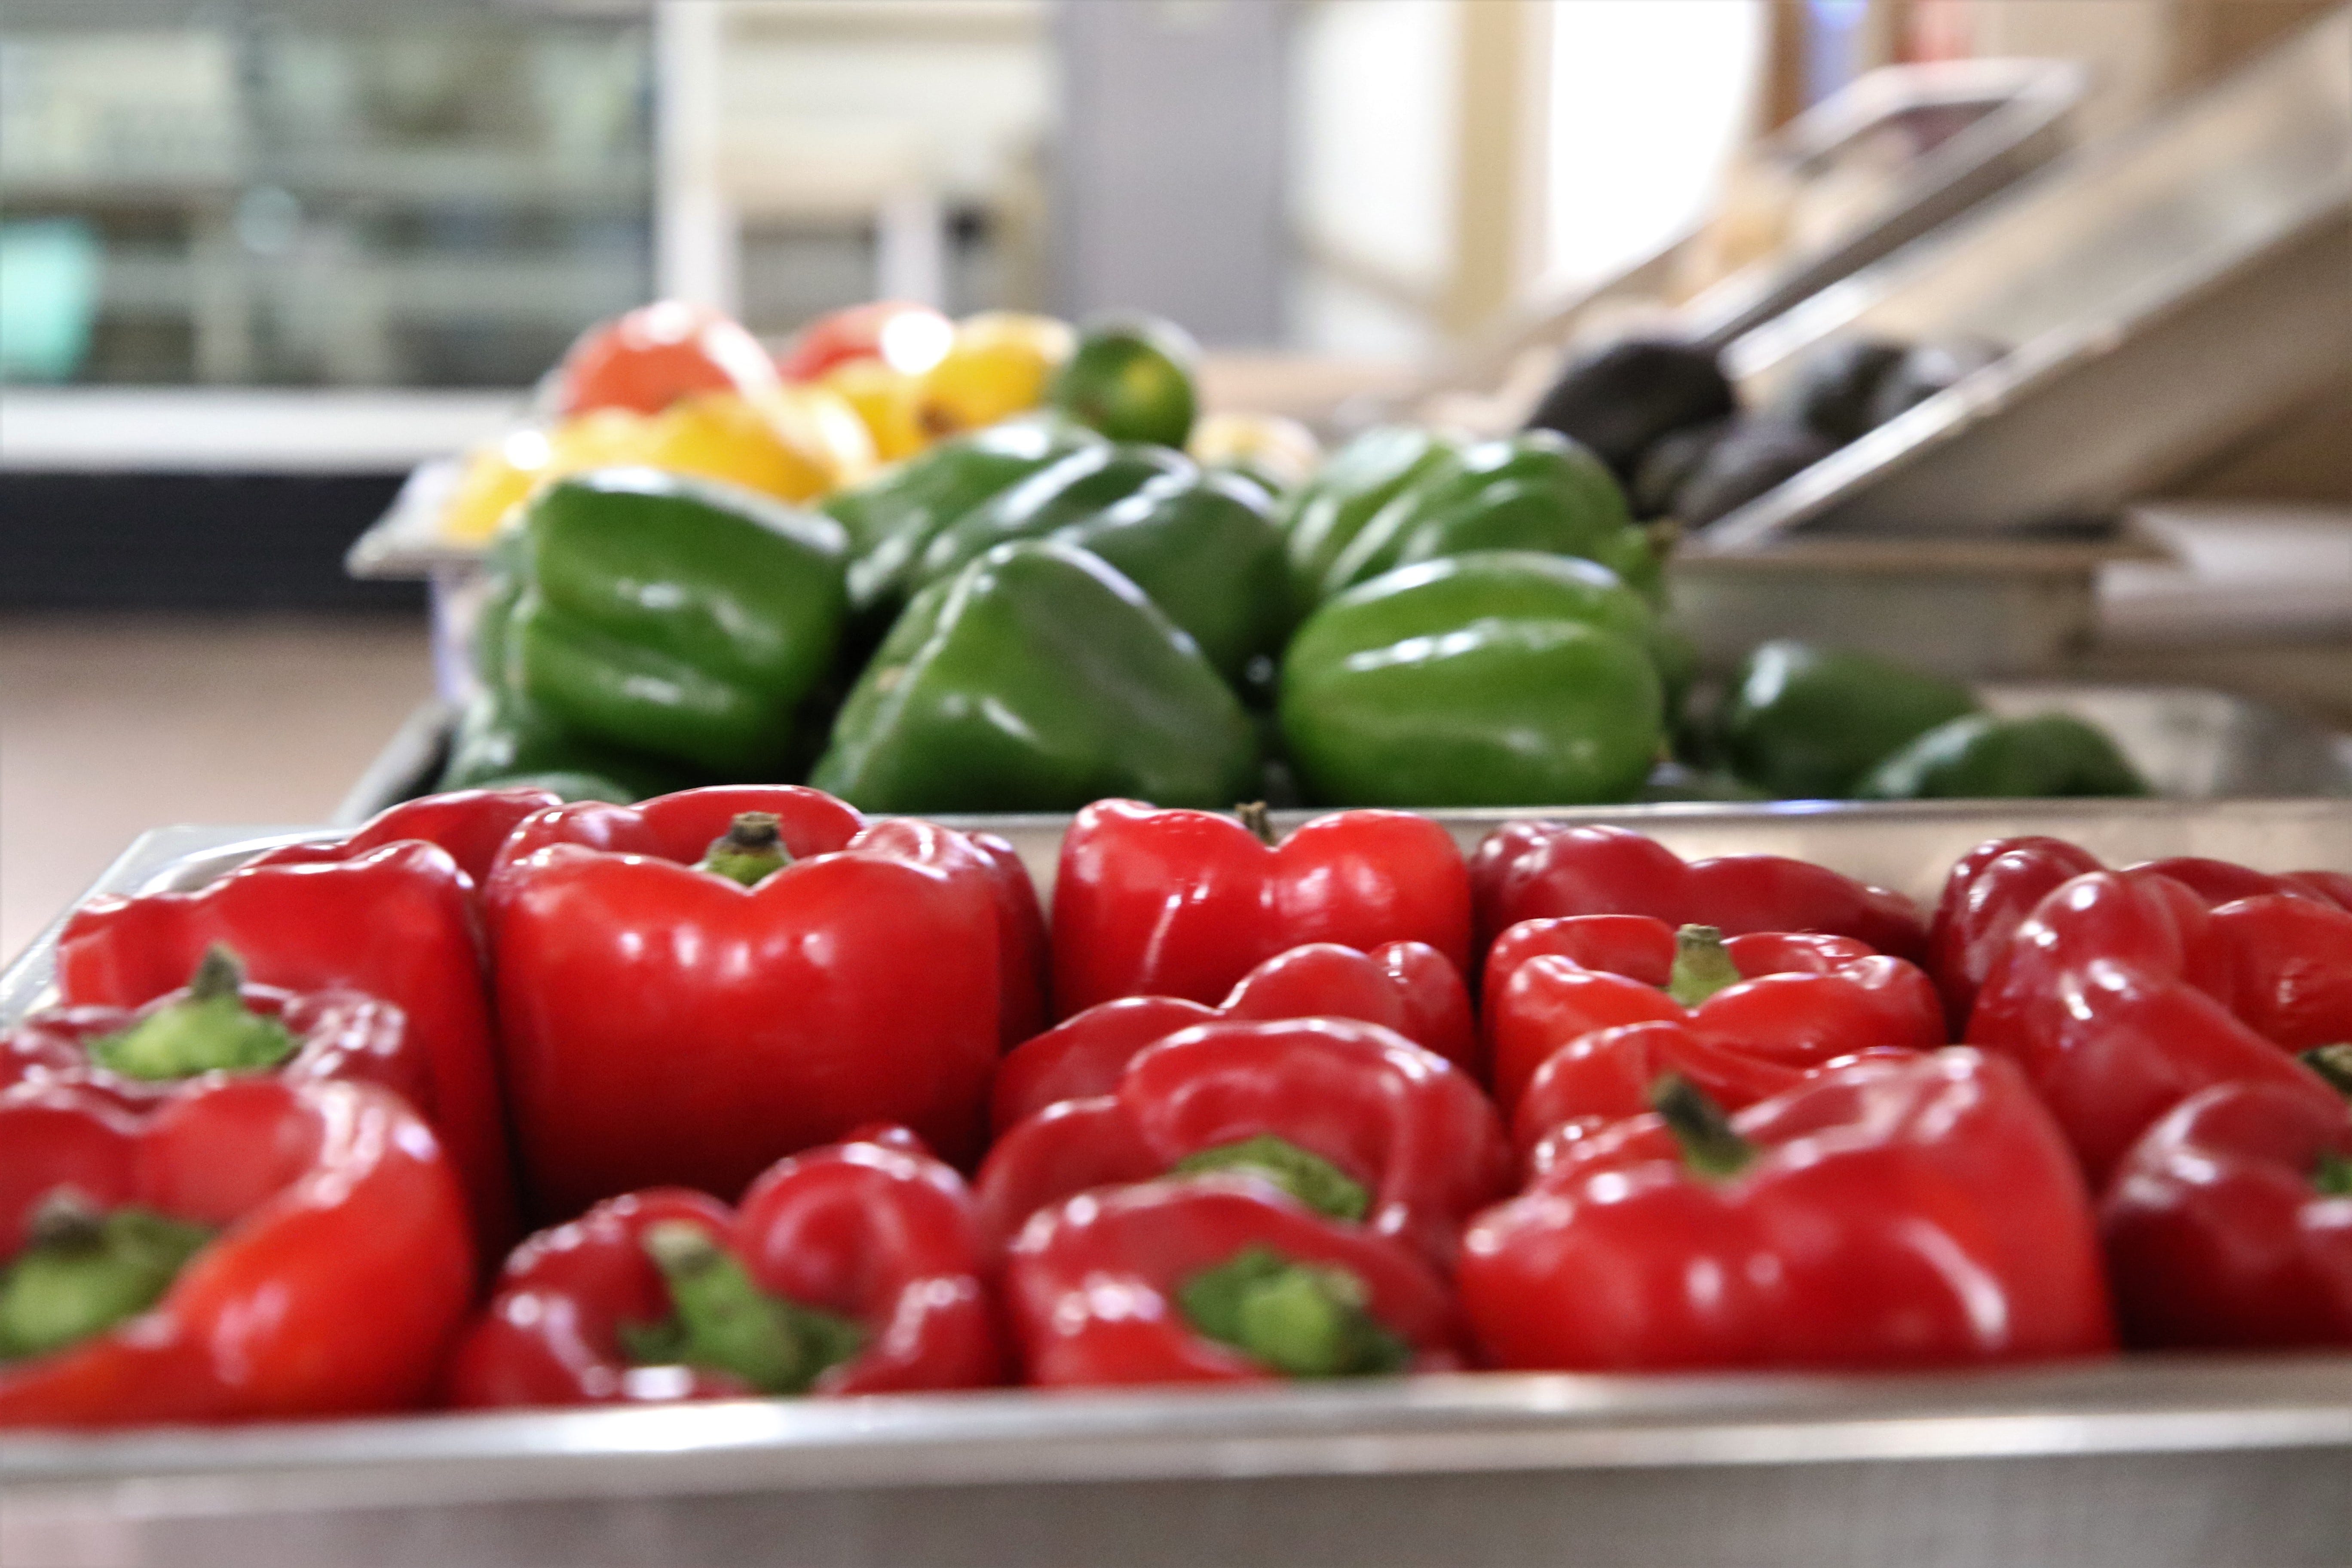 The coronavirus pandemic made it harder for restaurants to serve customers. Rubia's is now selling fresh produce like these peppers pictured, Wednesday, April 1, 2020, in Aztec.